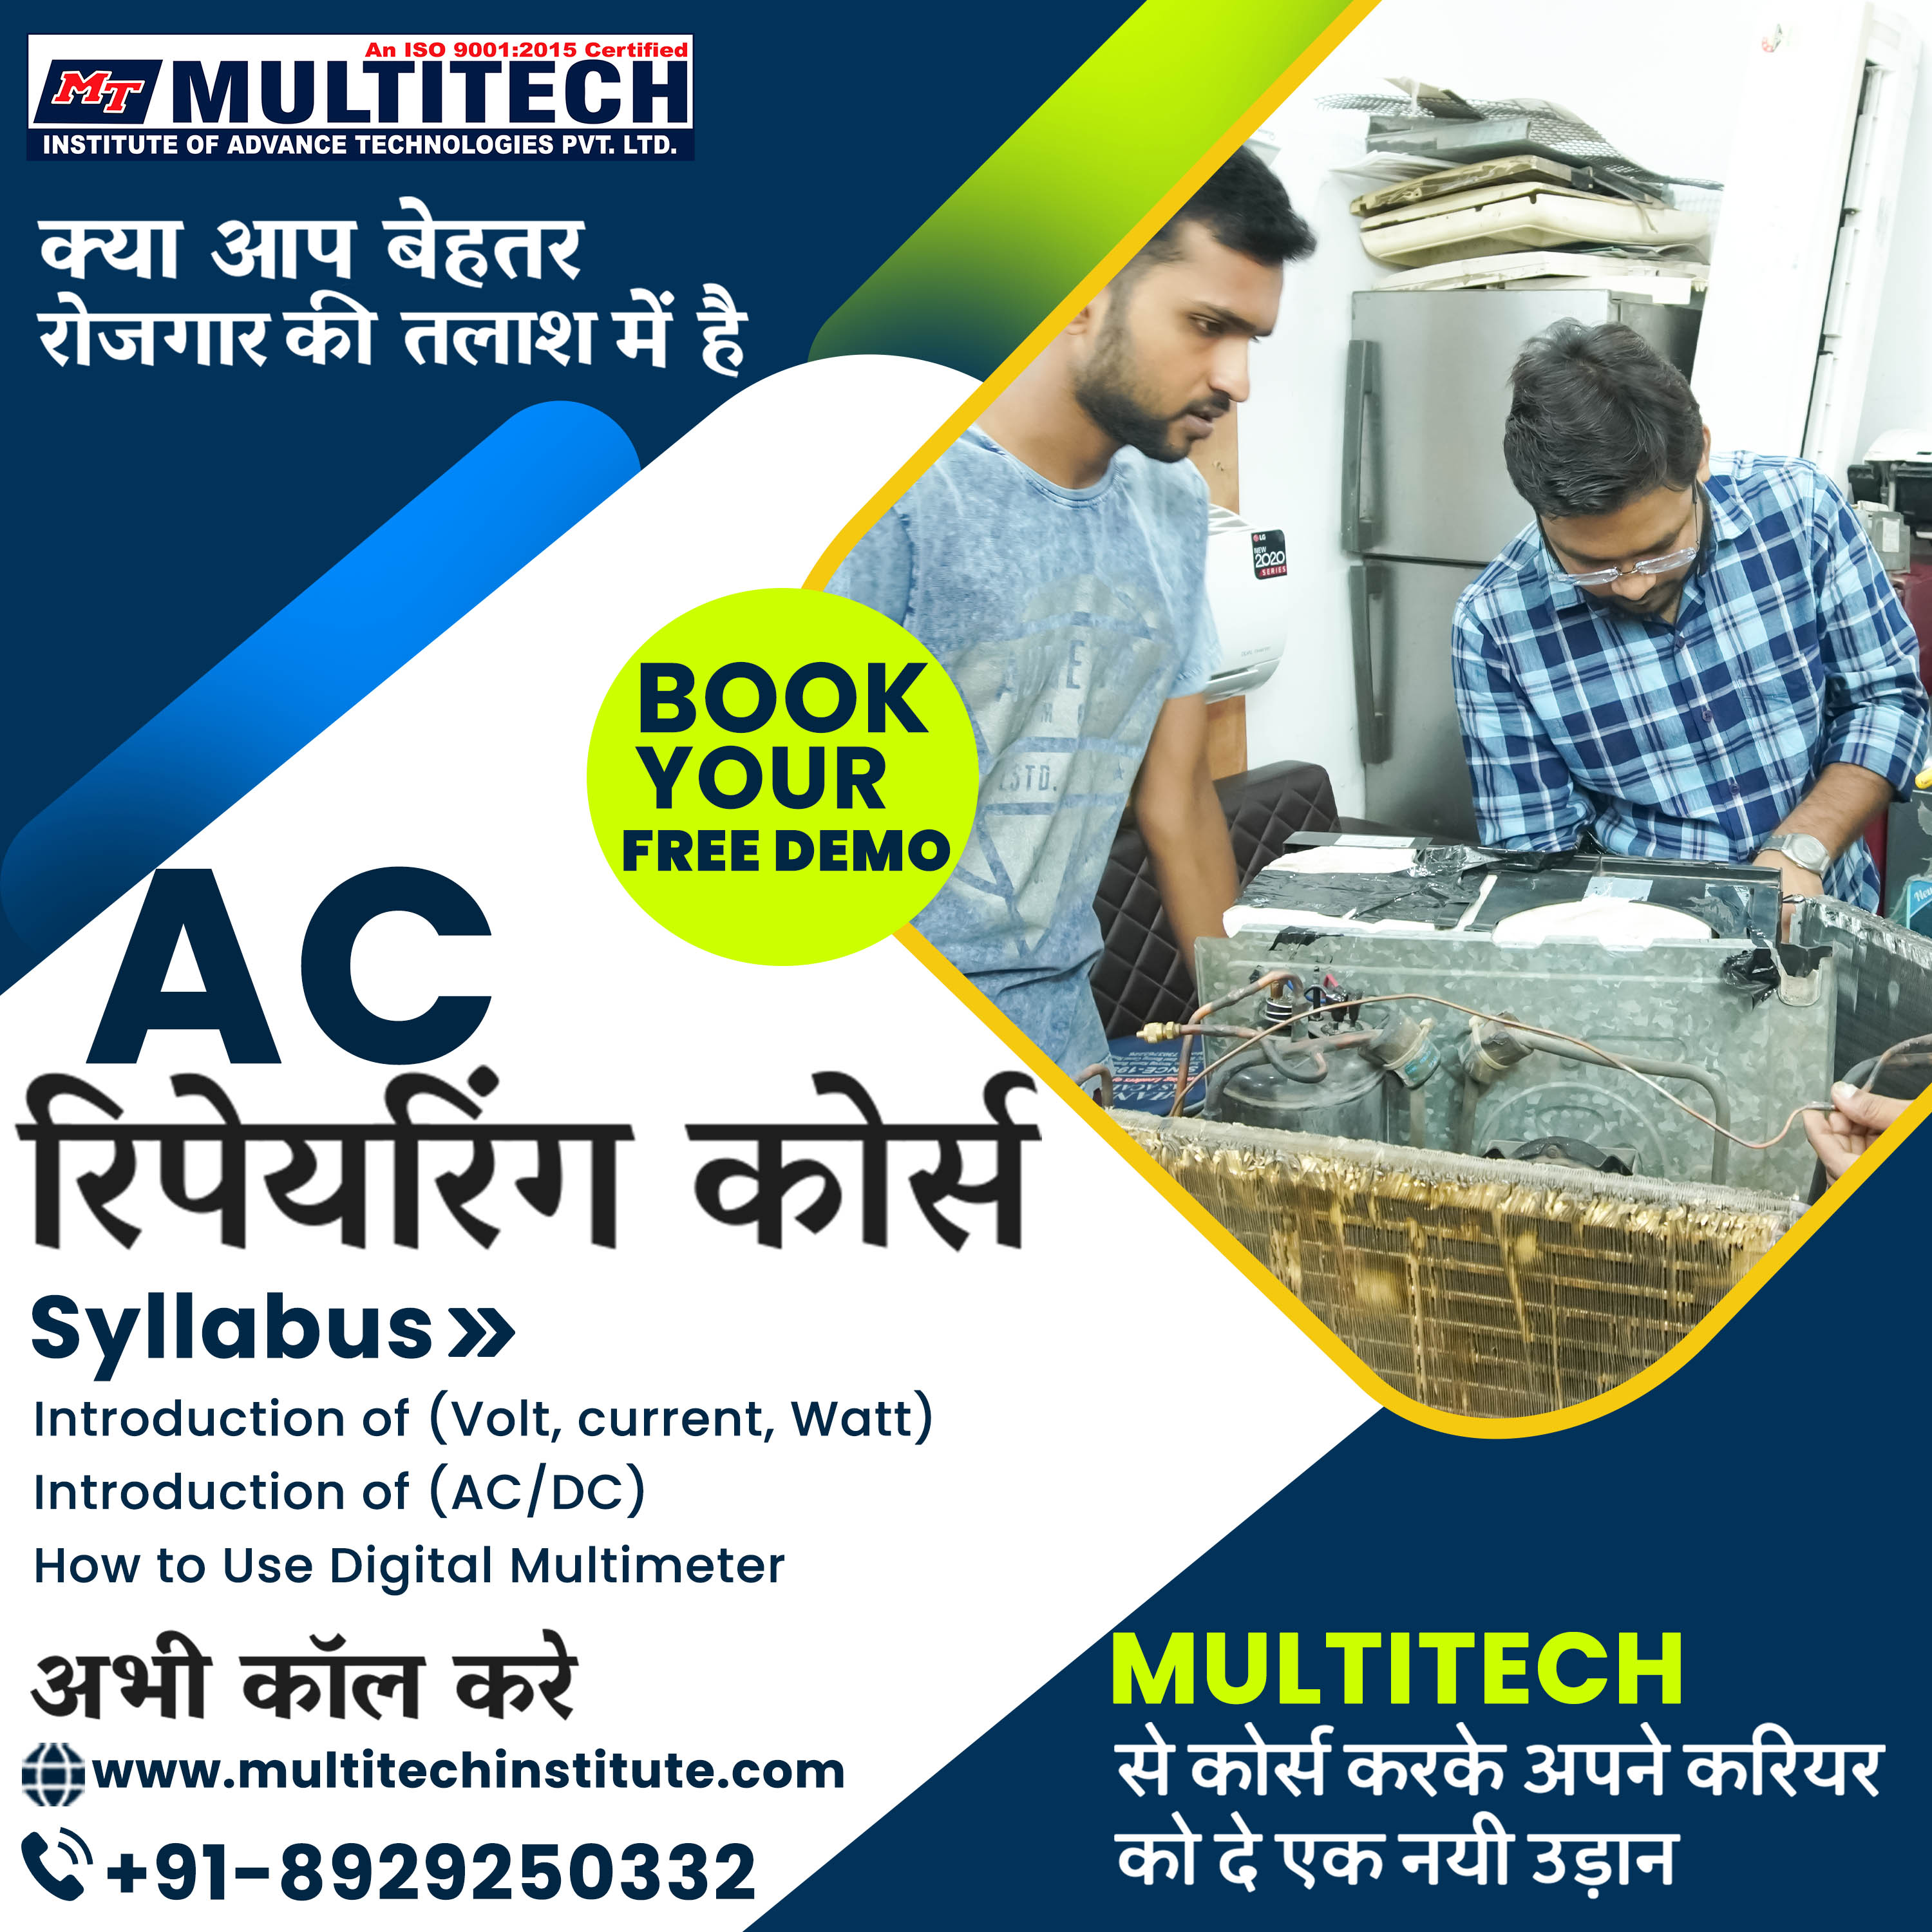 Need financial assistance for an AC Repairing Course? Find options here